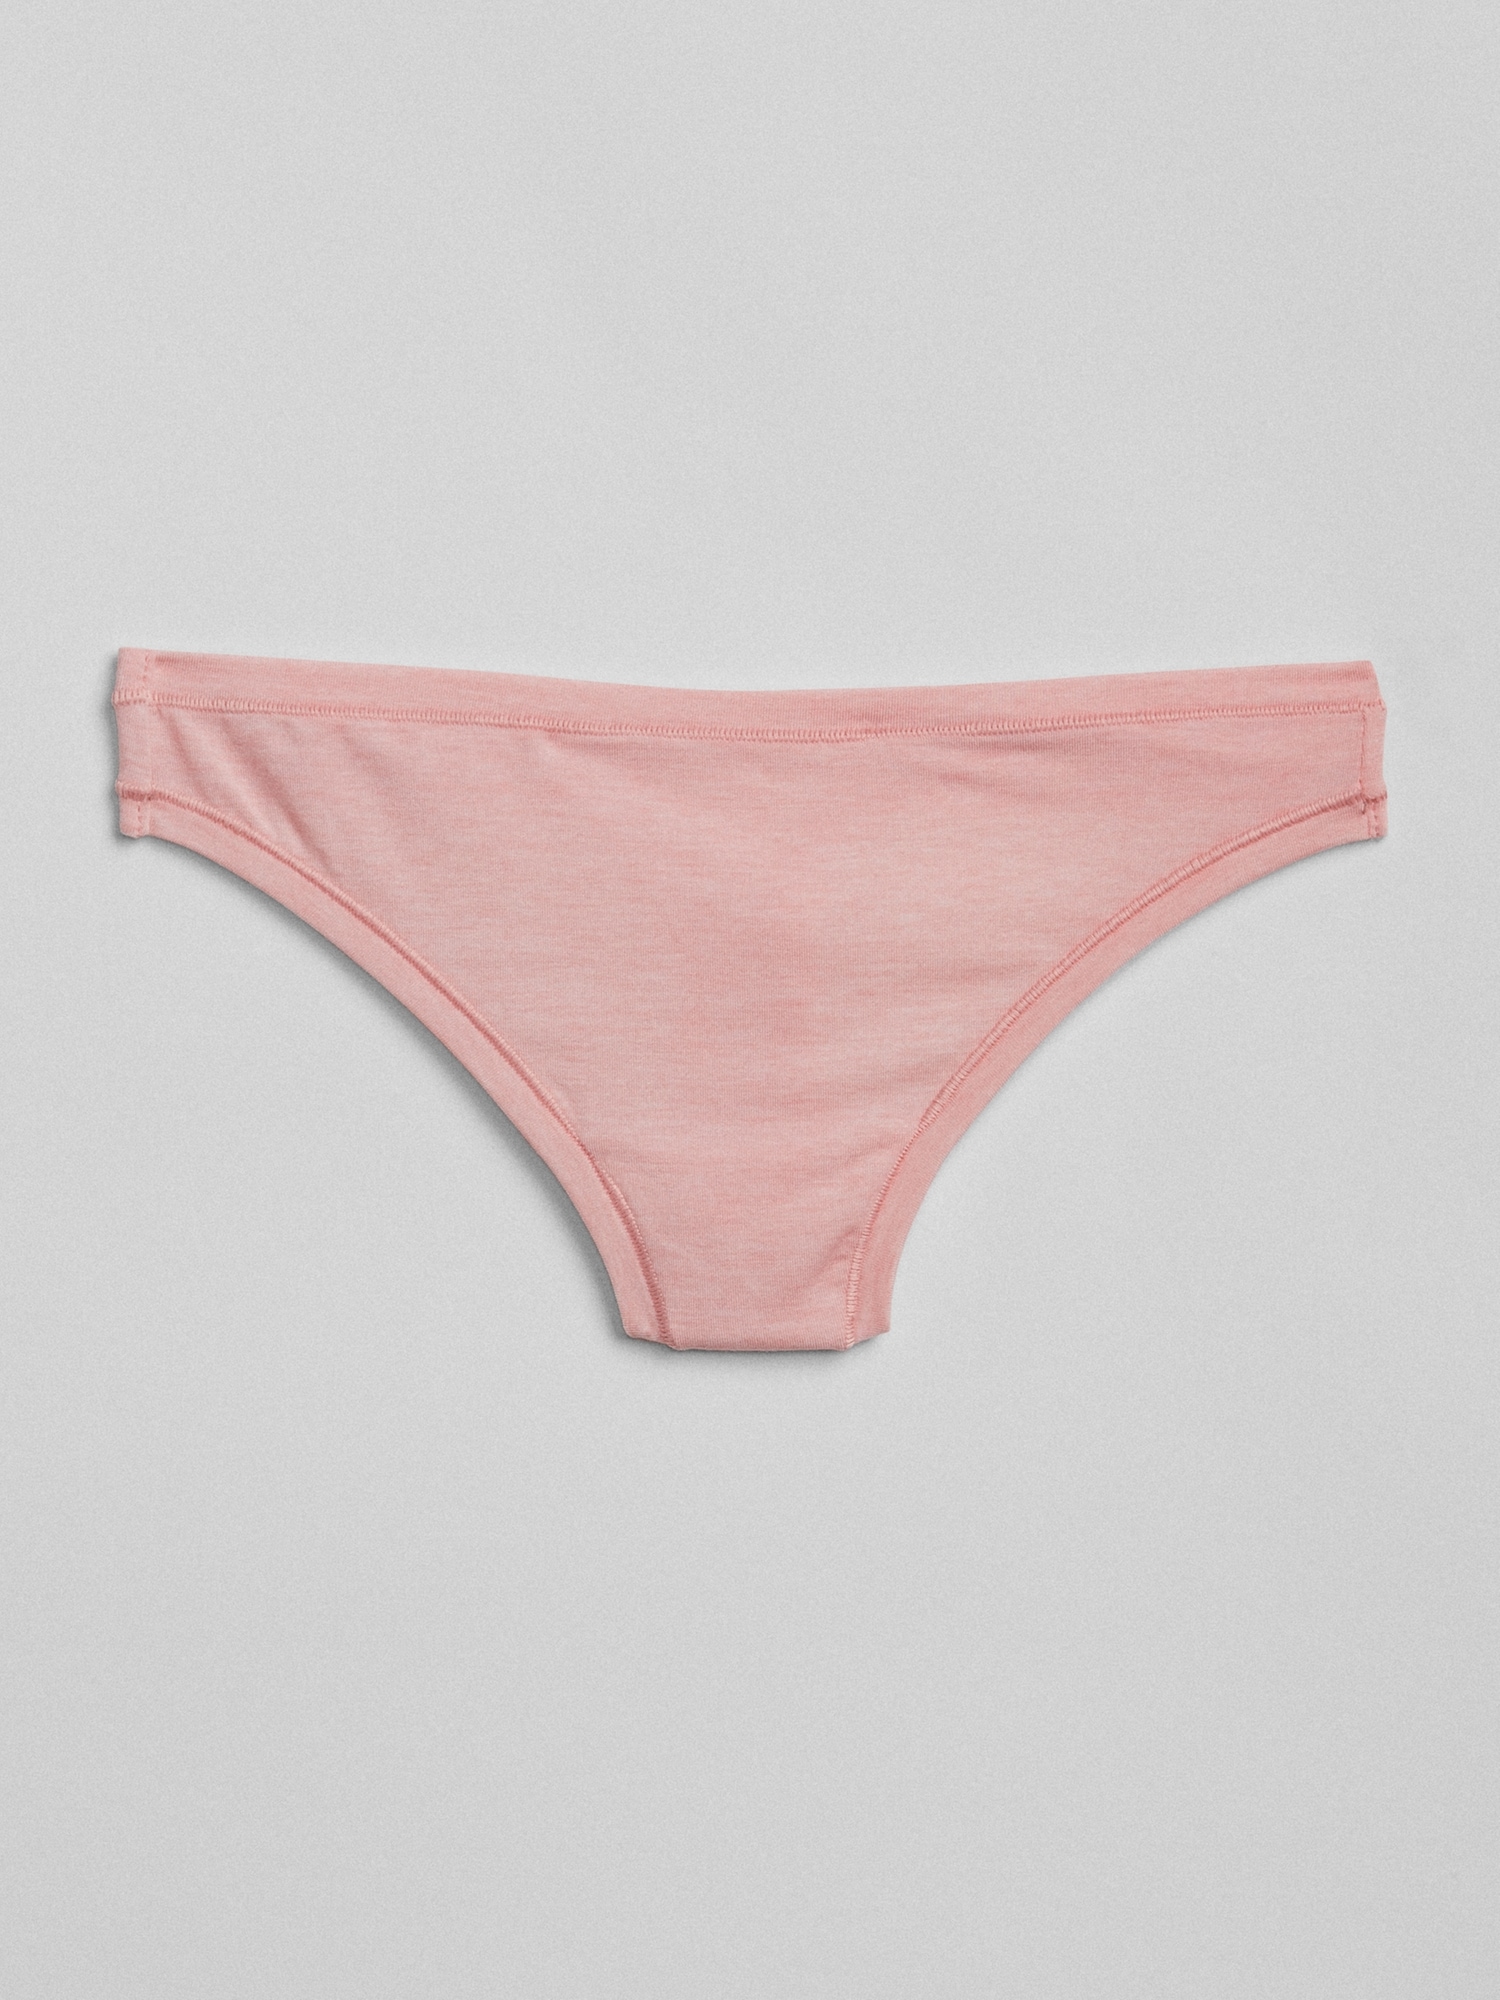 NWT LOVE By GAP Body Breathe Thong, Belle Pink, Size XS, $12.50, #421102 